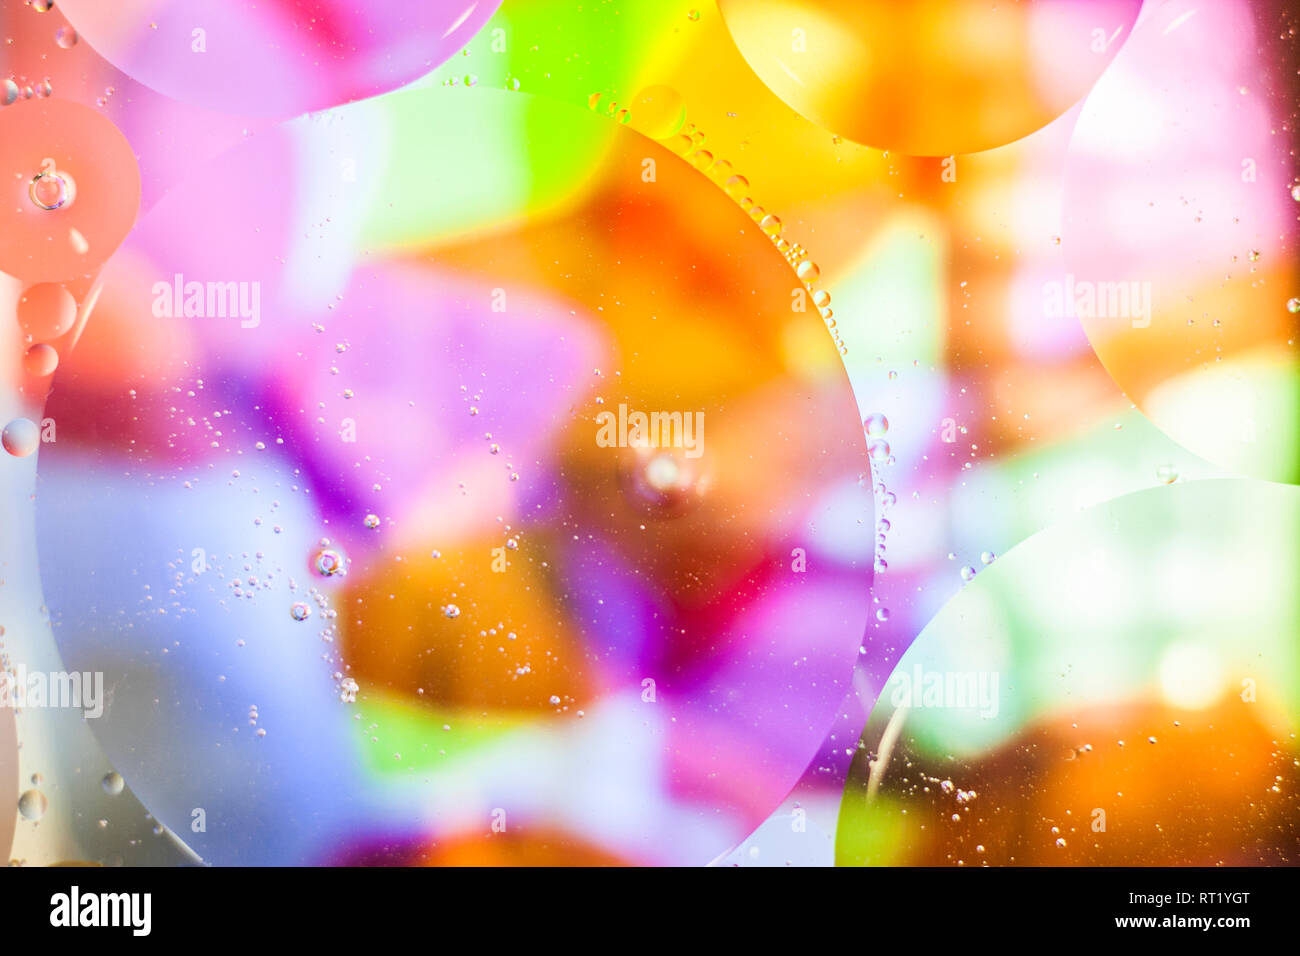 Multicolor bubbles abstract background. Horizontal Stock Photo